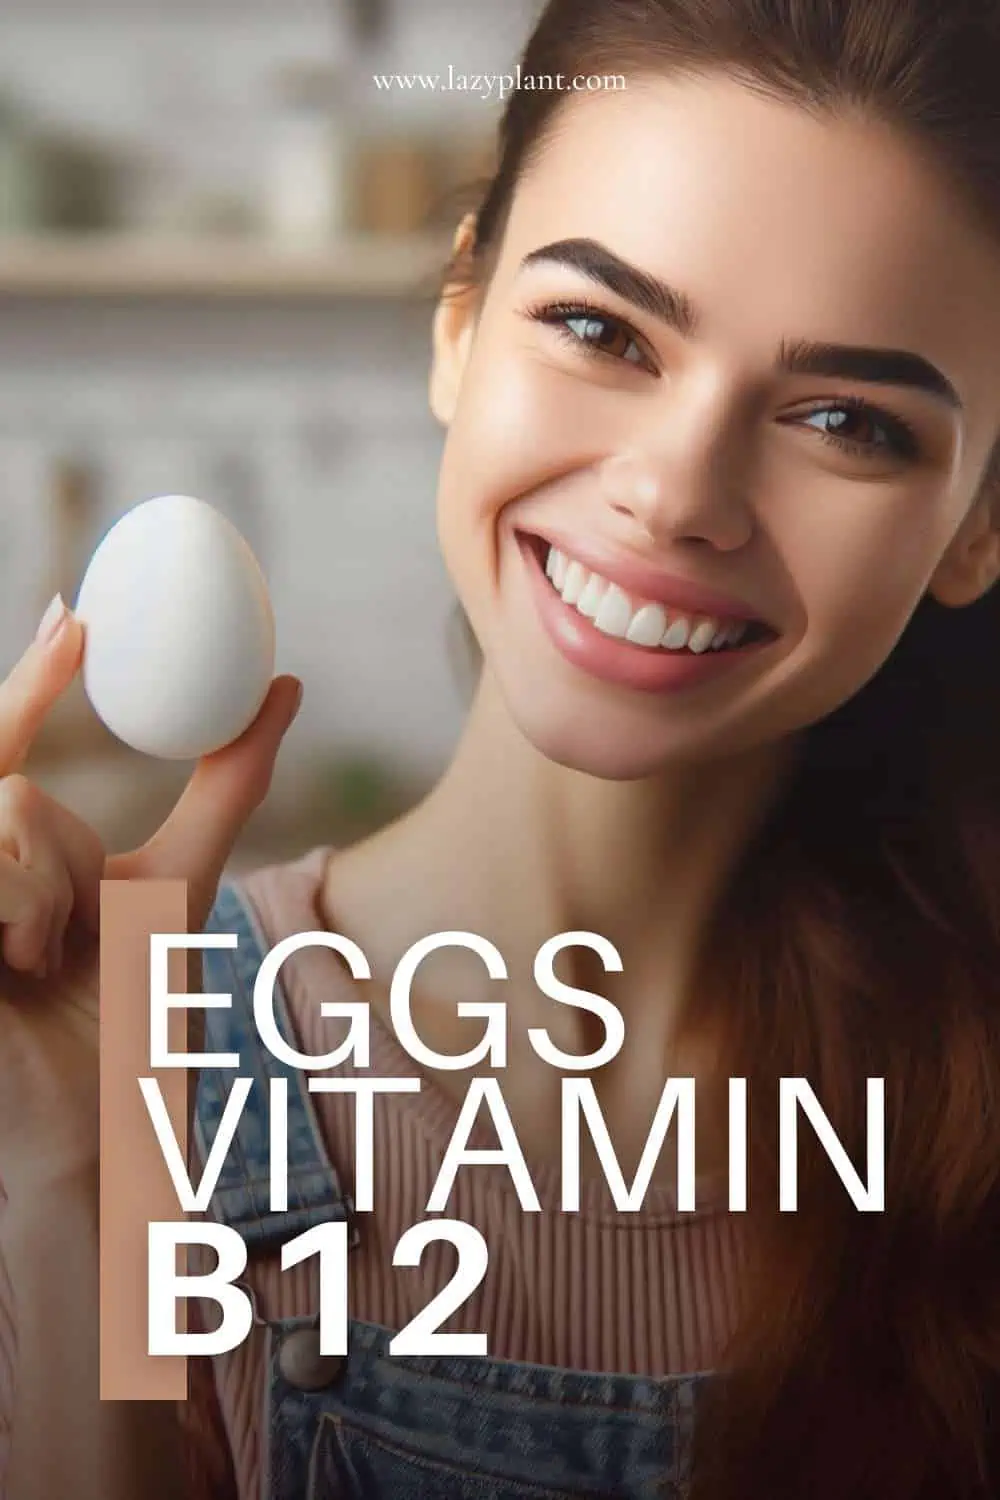 How much Vitamin B12 is in a Egg?